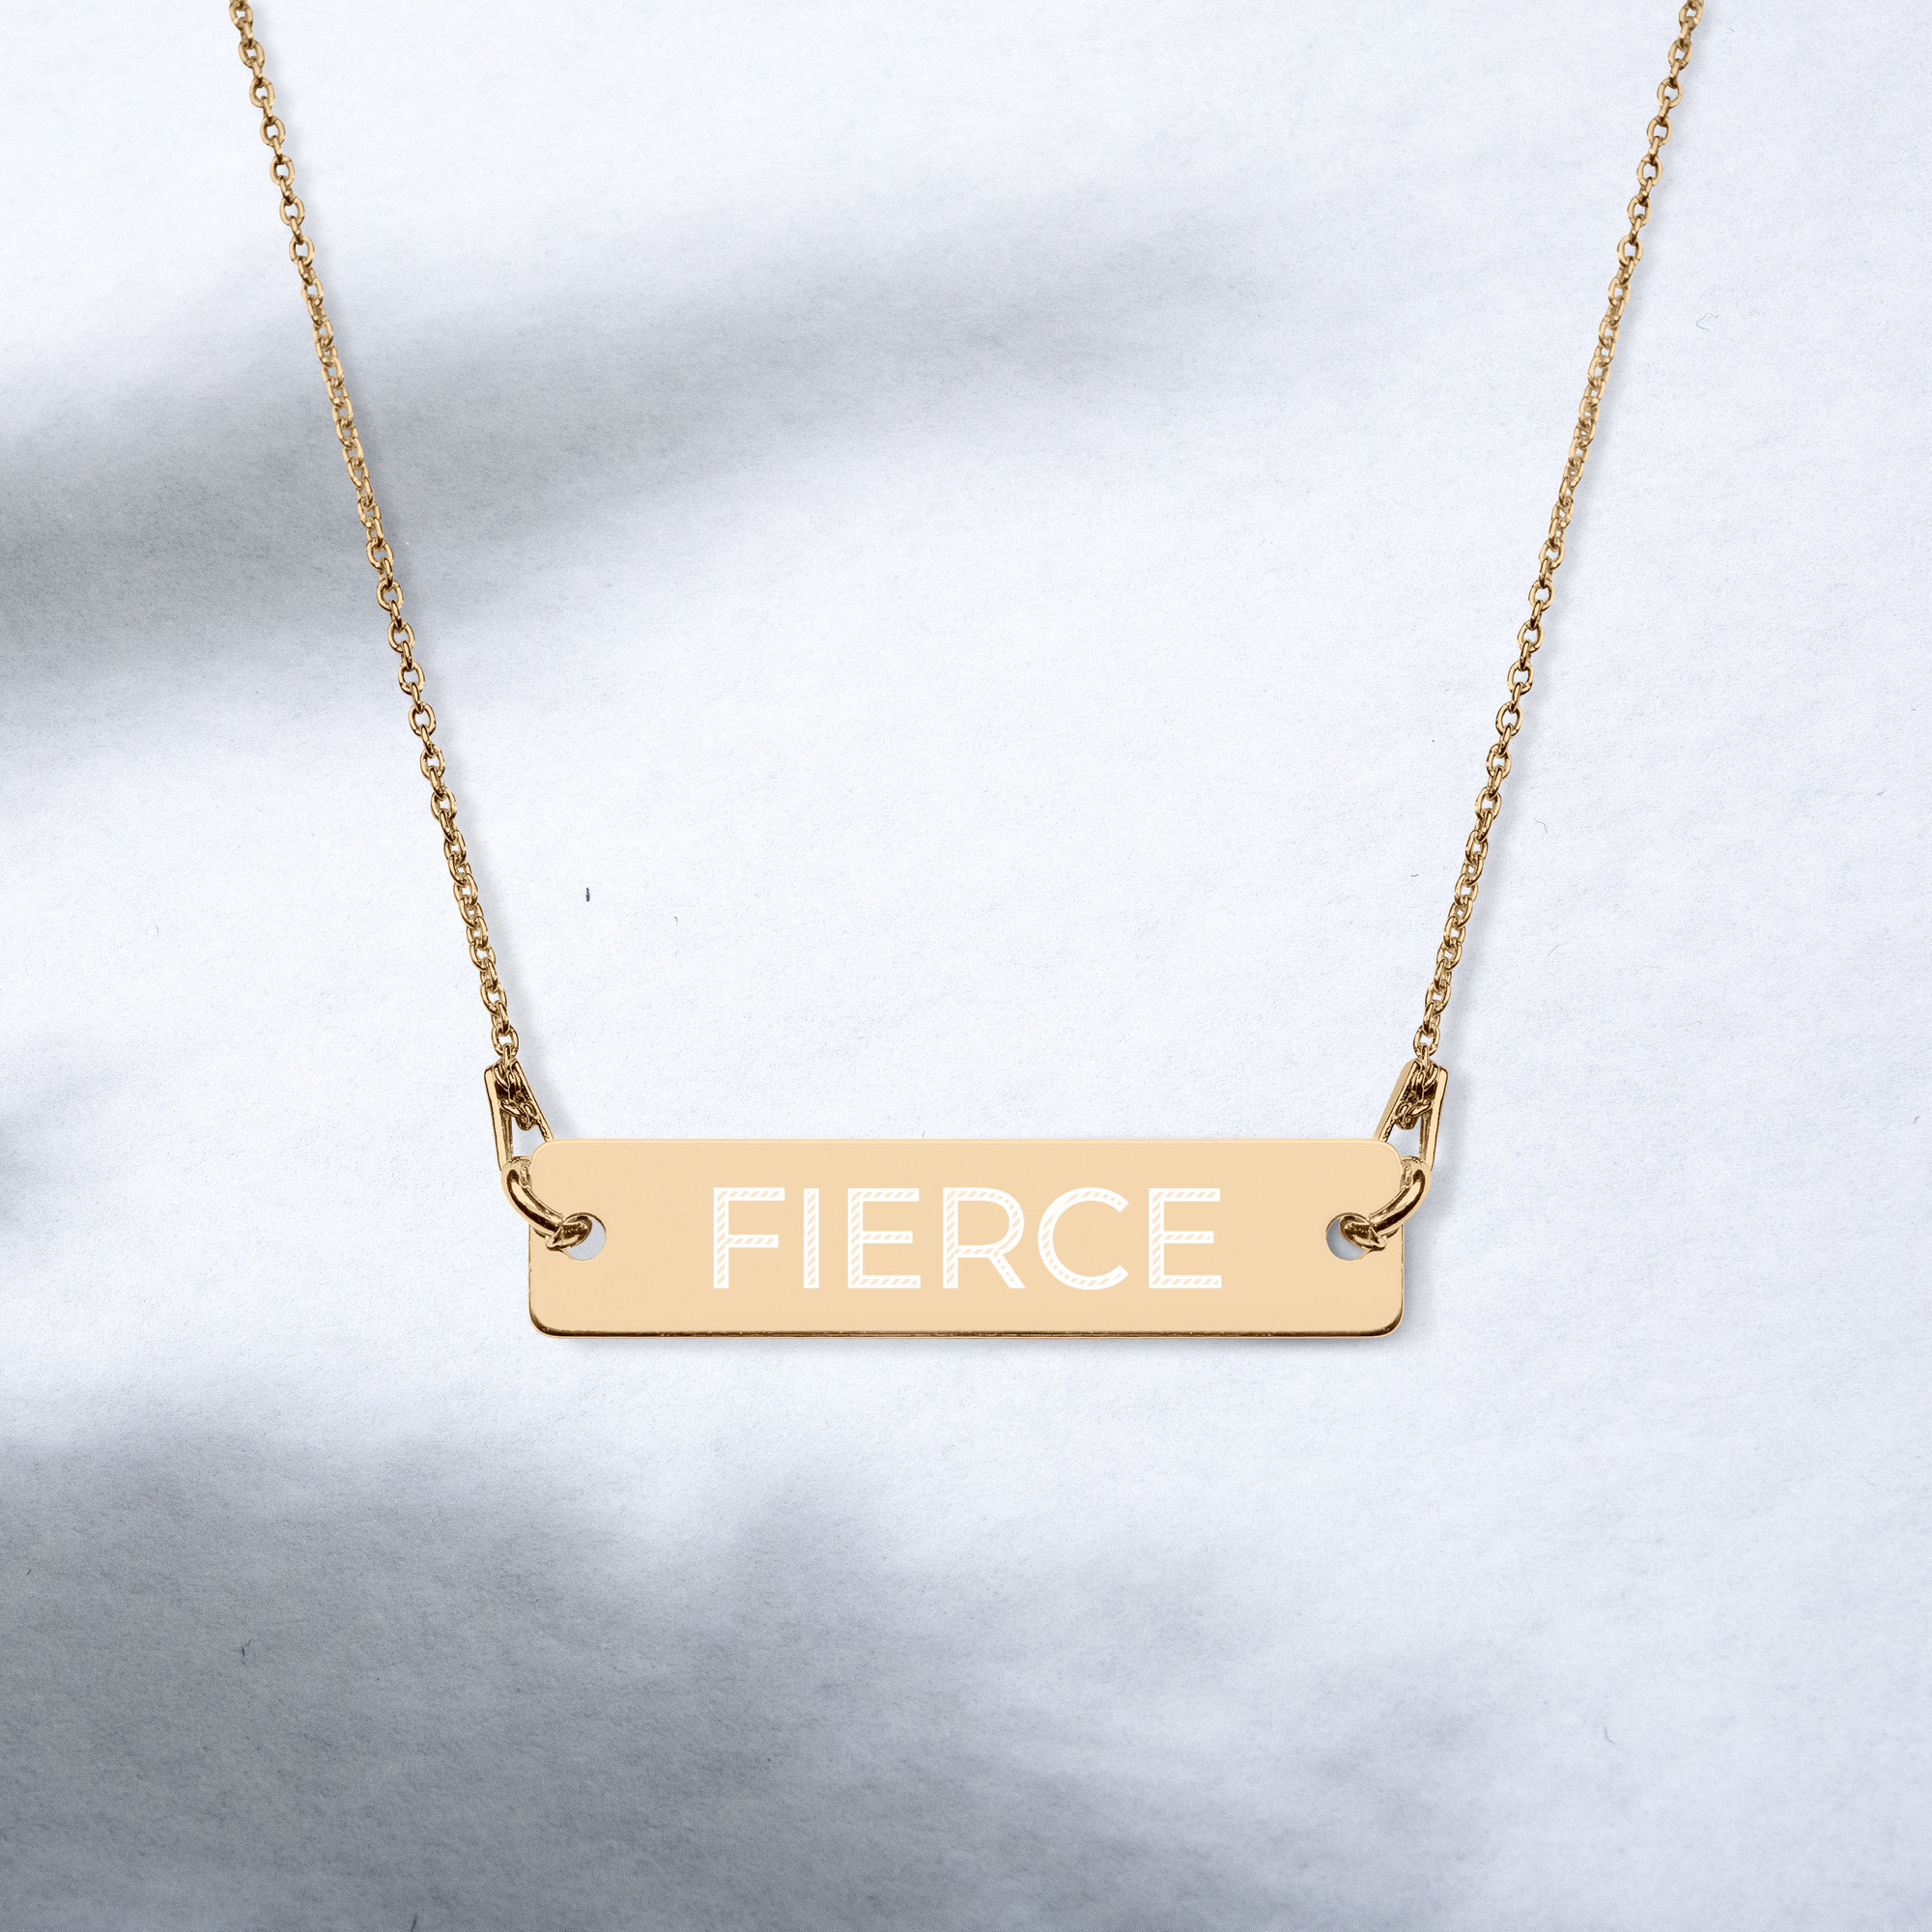 engraved-silver-bar-chain-necklace-24k-gold-coating-lifestyle-2-637d3b9438a42.jpg